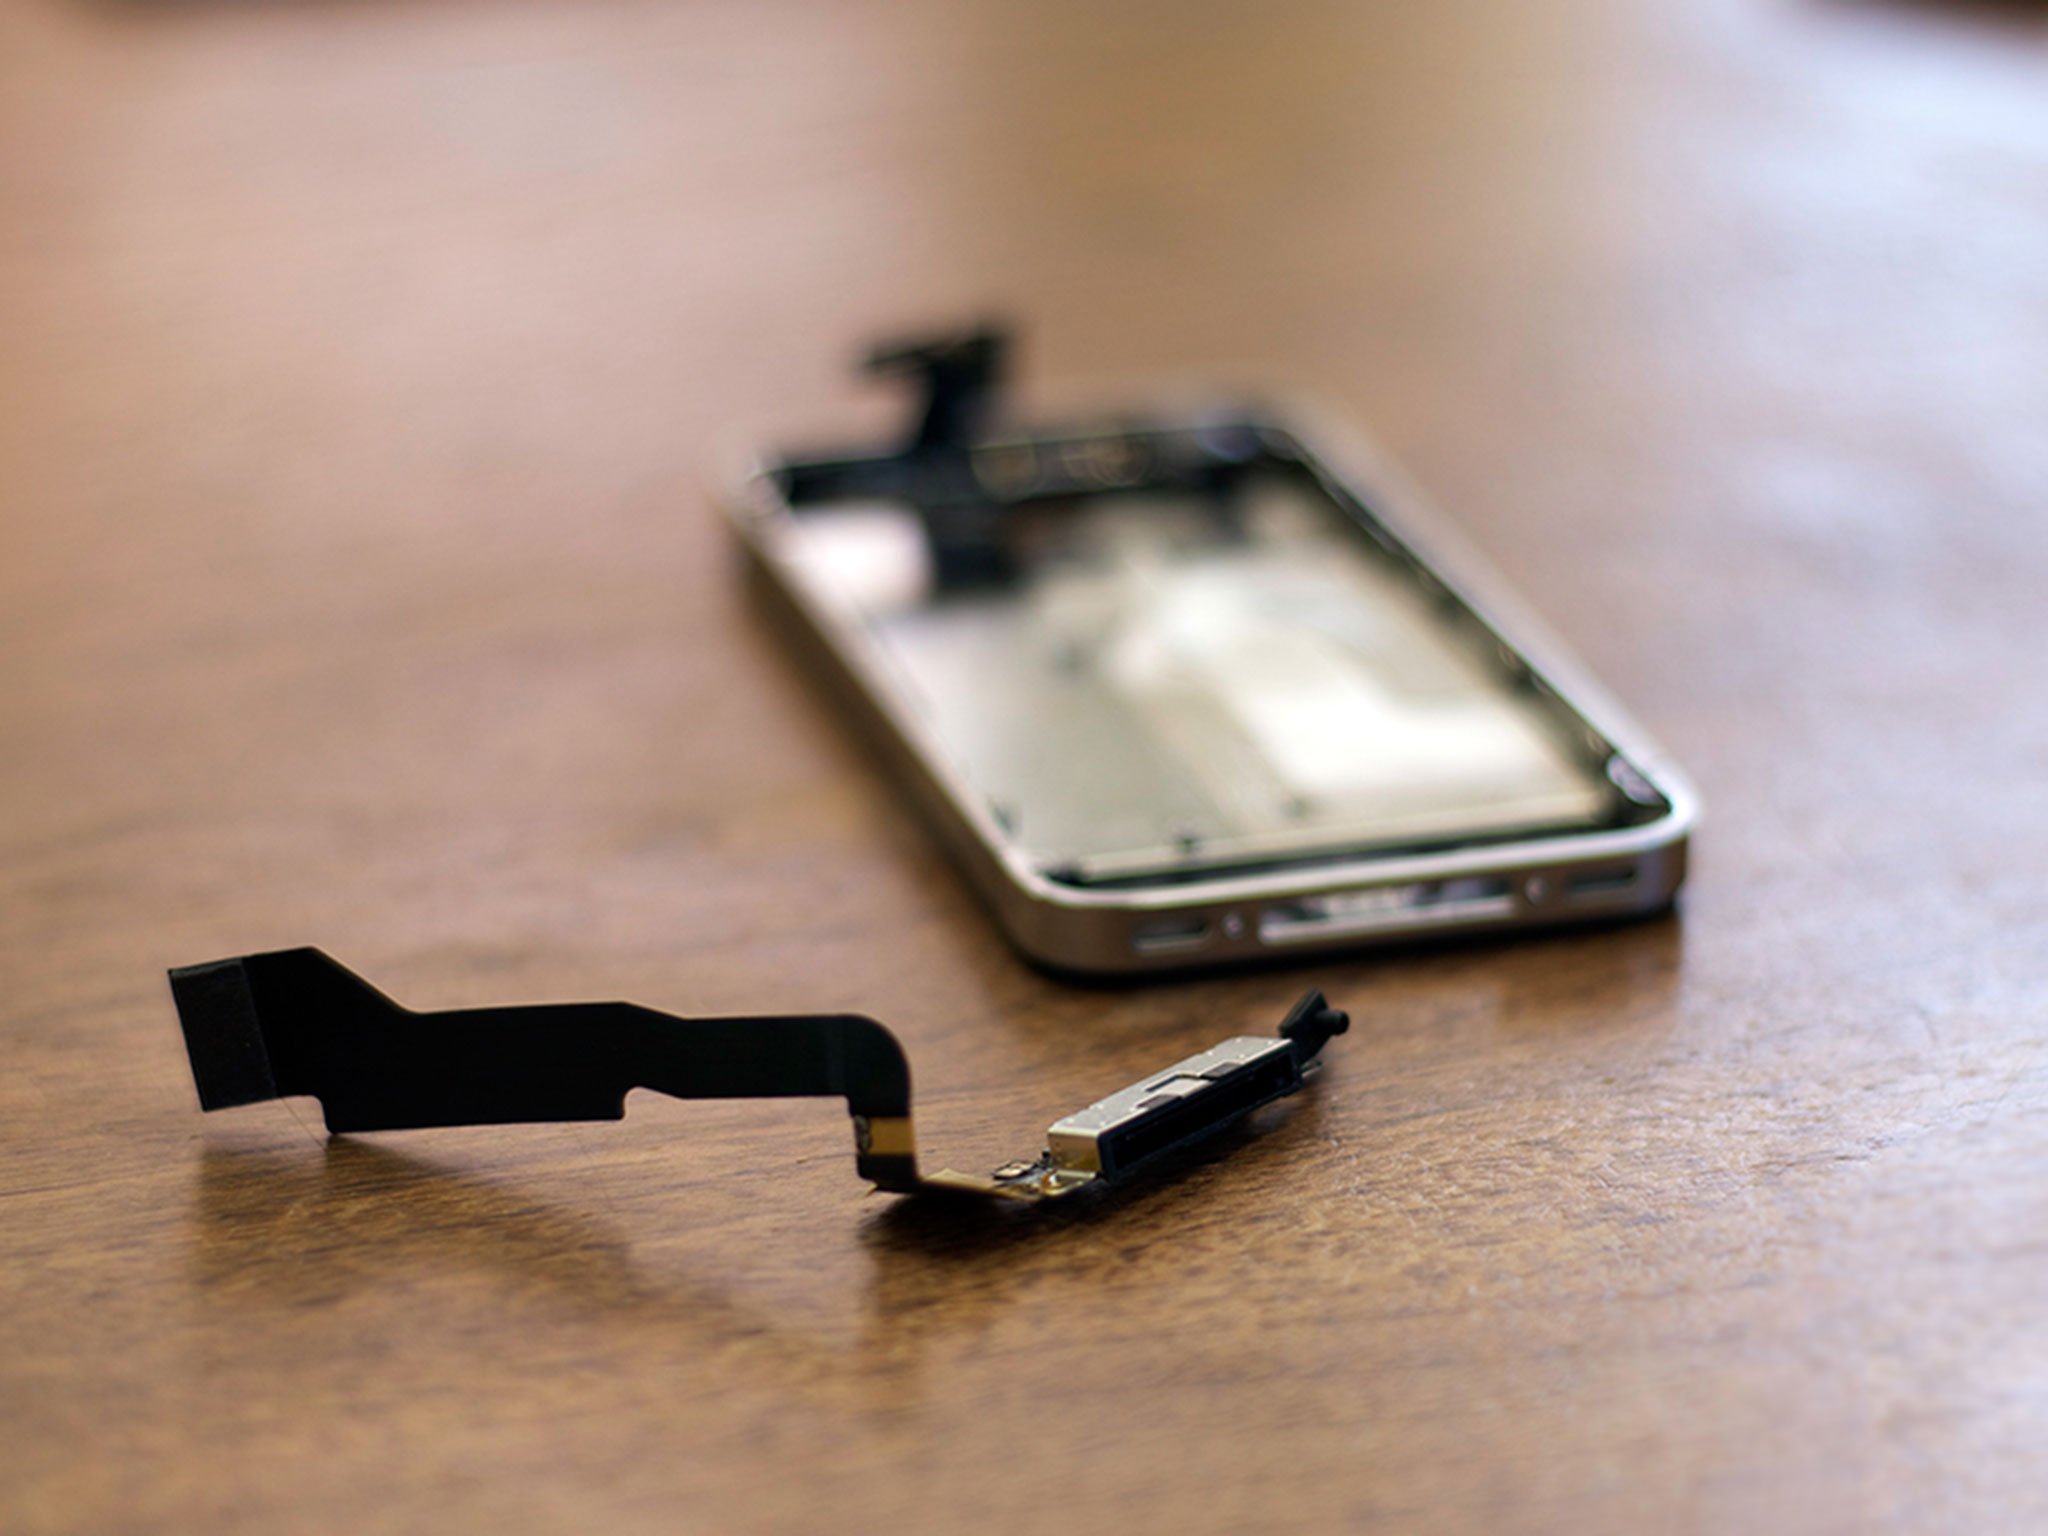 How to replace the dock in a CDMA iPhone 4